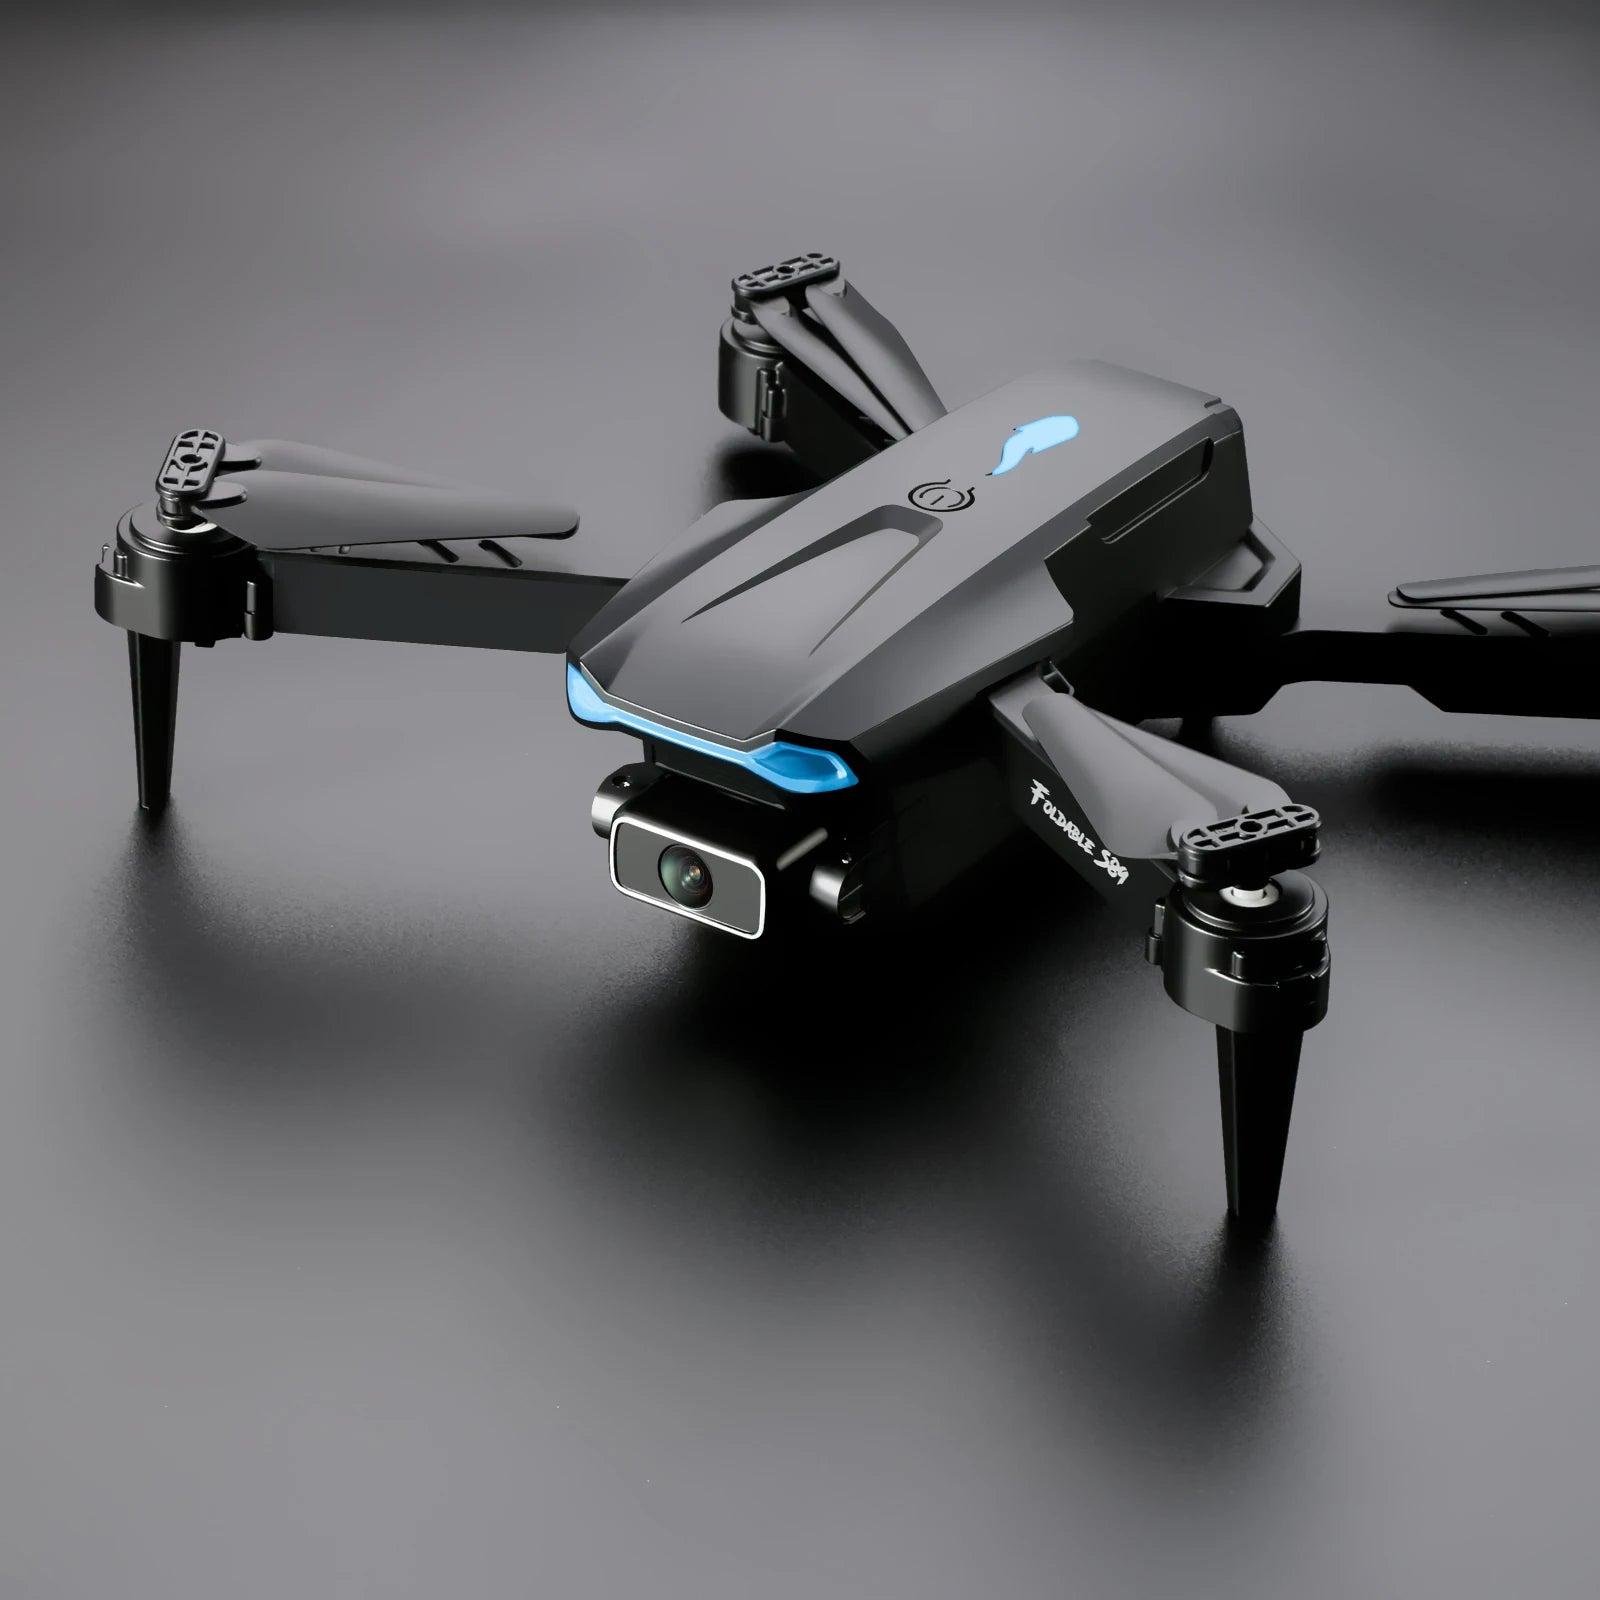 S89 Drone, then the drone will automatically fly following the set track